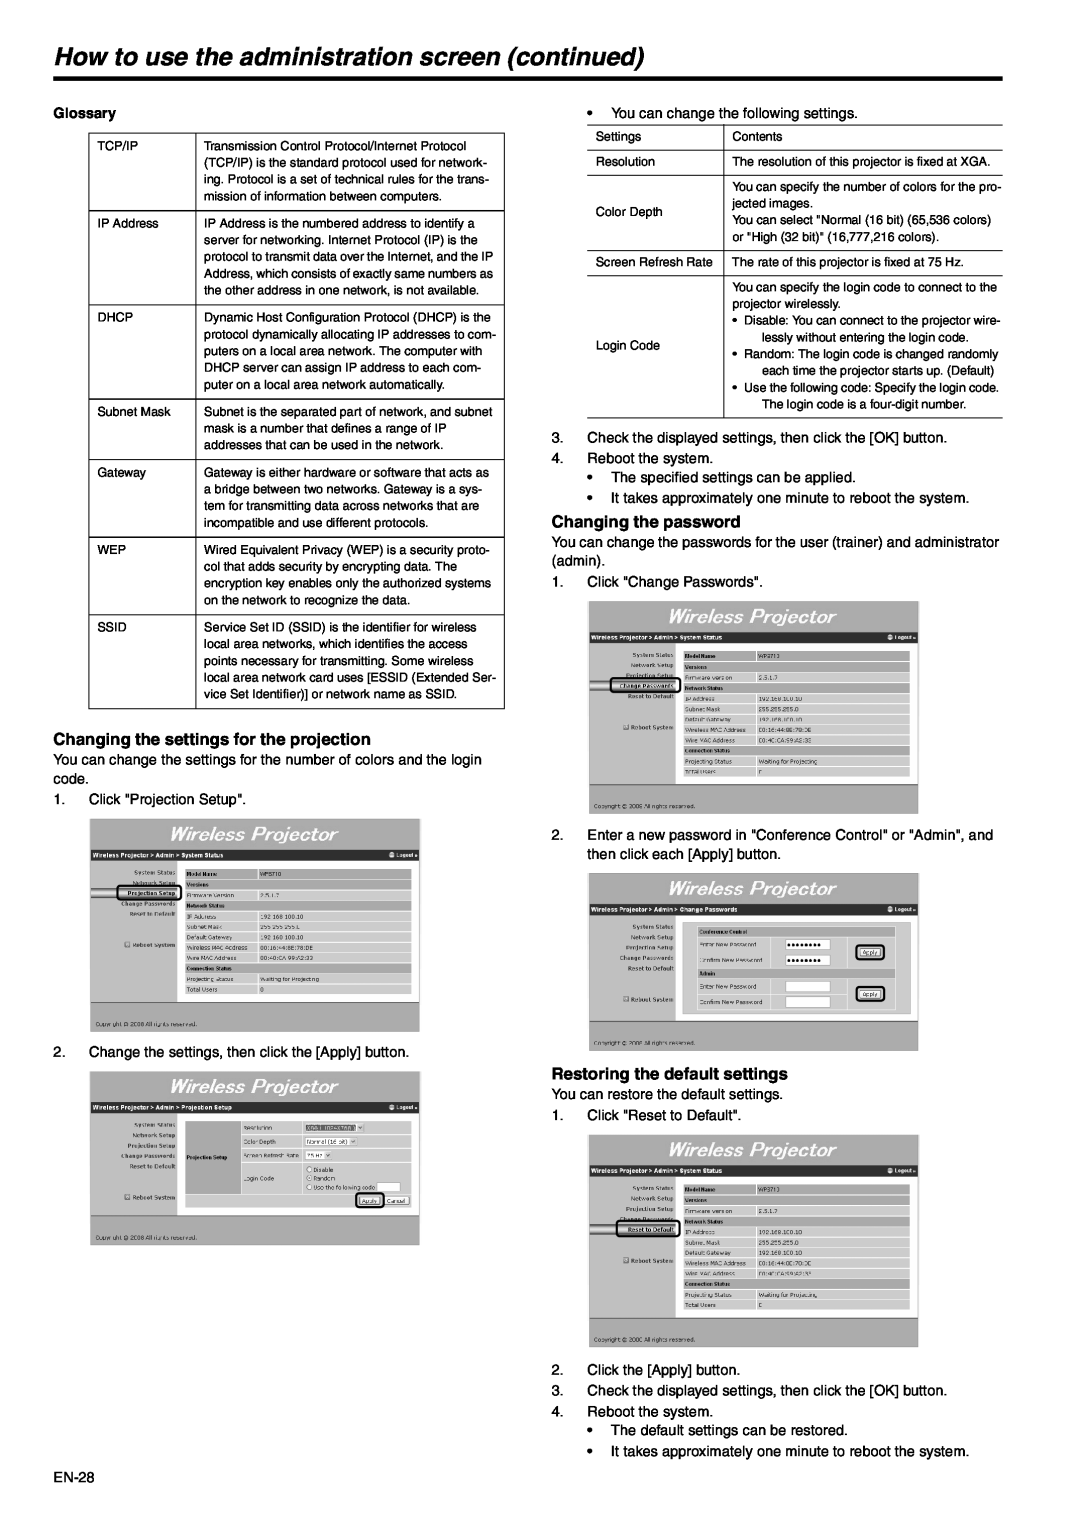 Mitsubishi Electronics EX53U, EX53E user manual Changing the settings for the projection, Changing the password, Glossary 